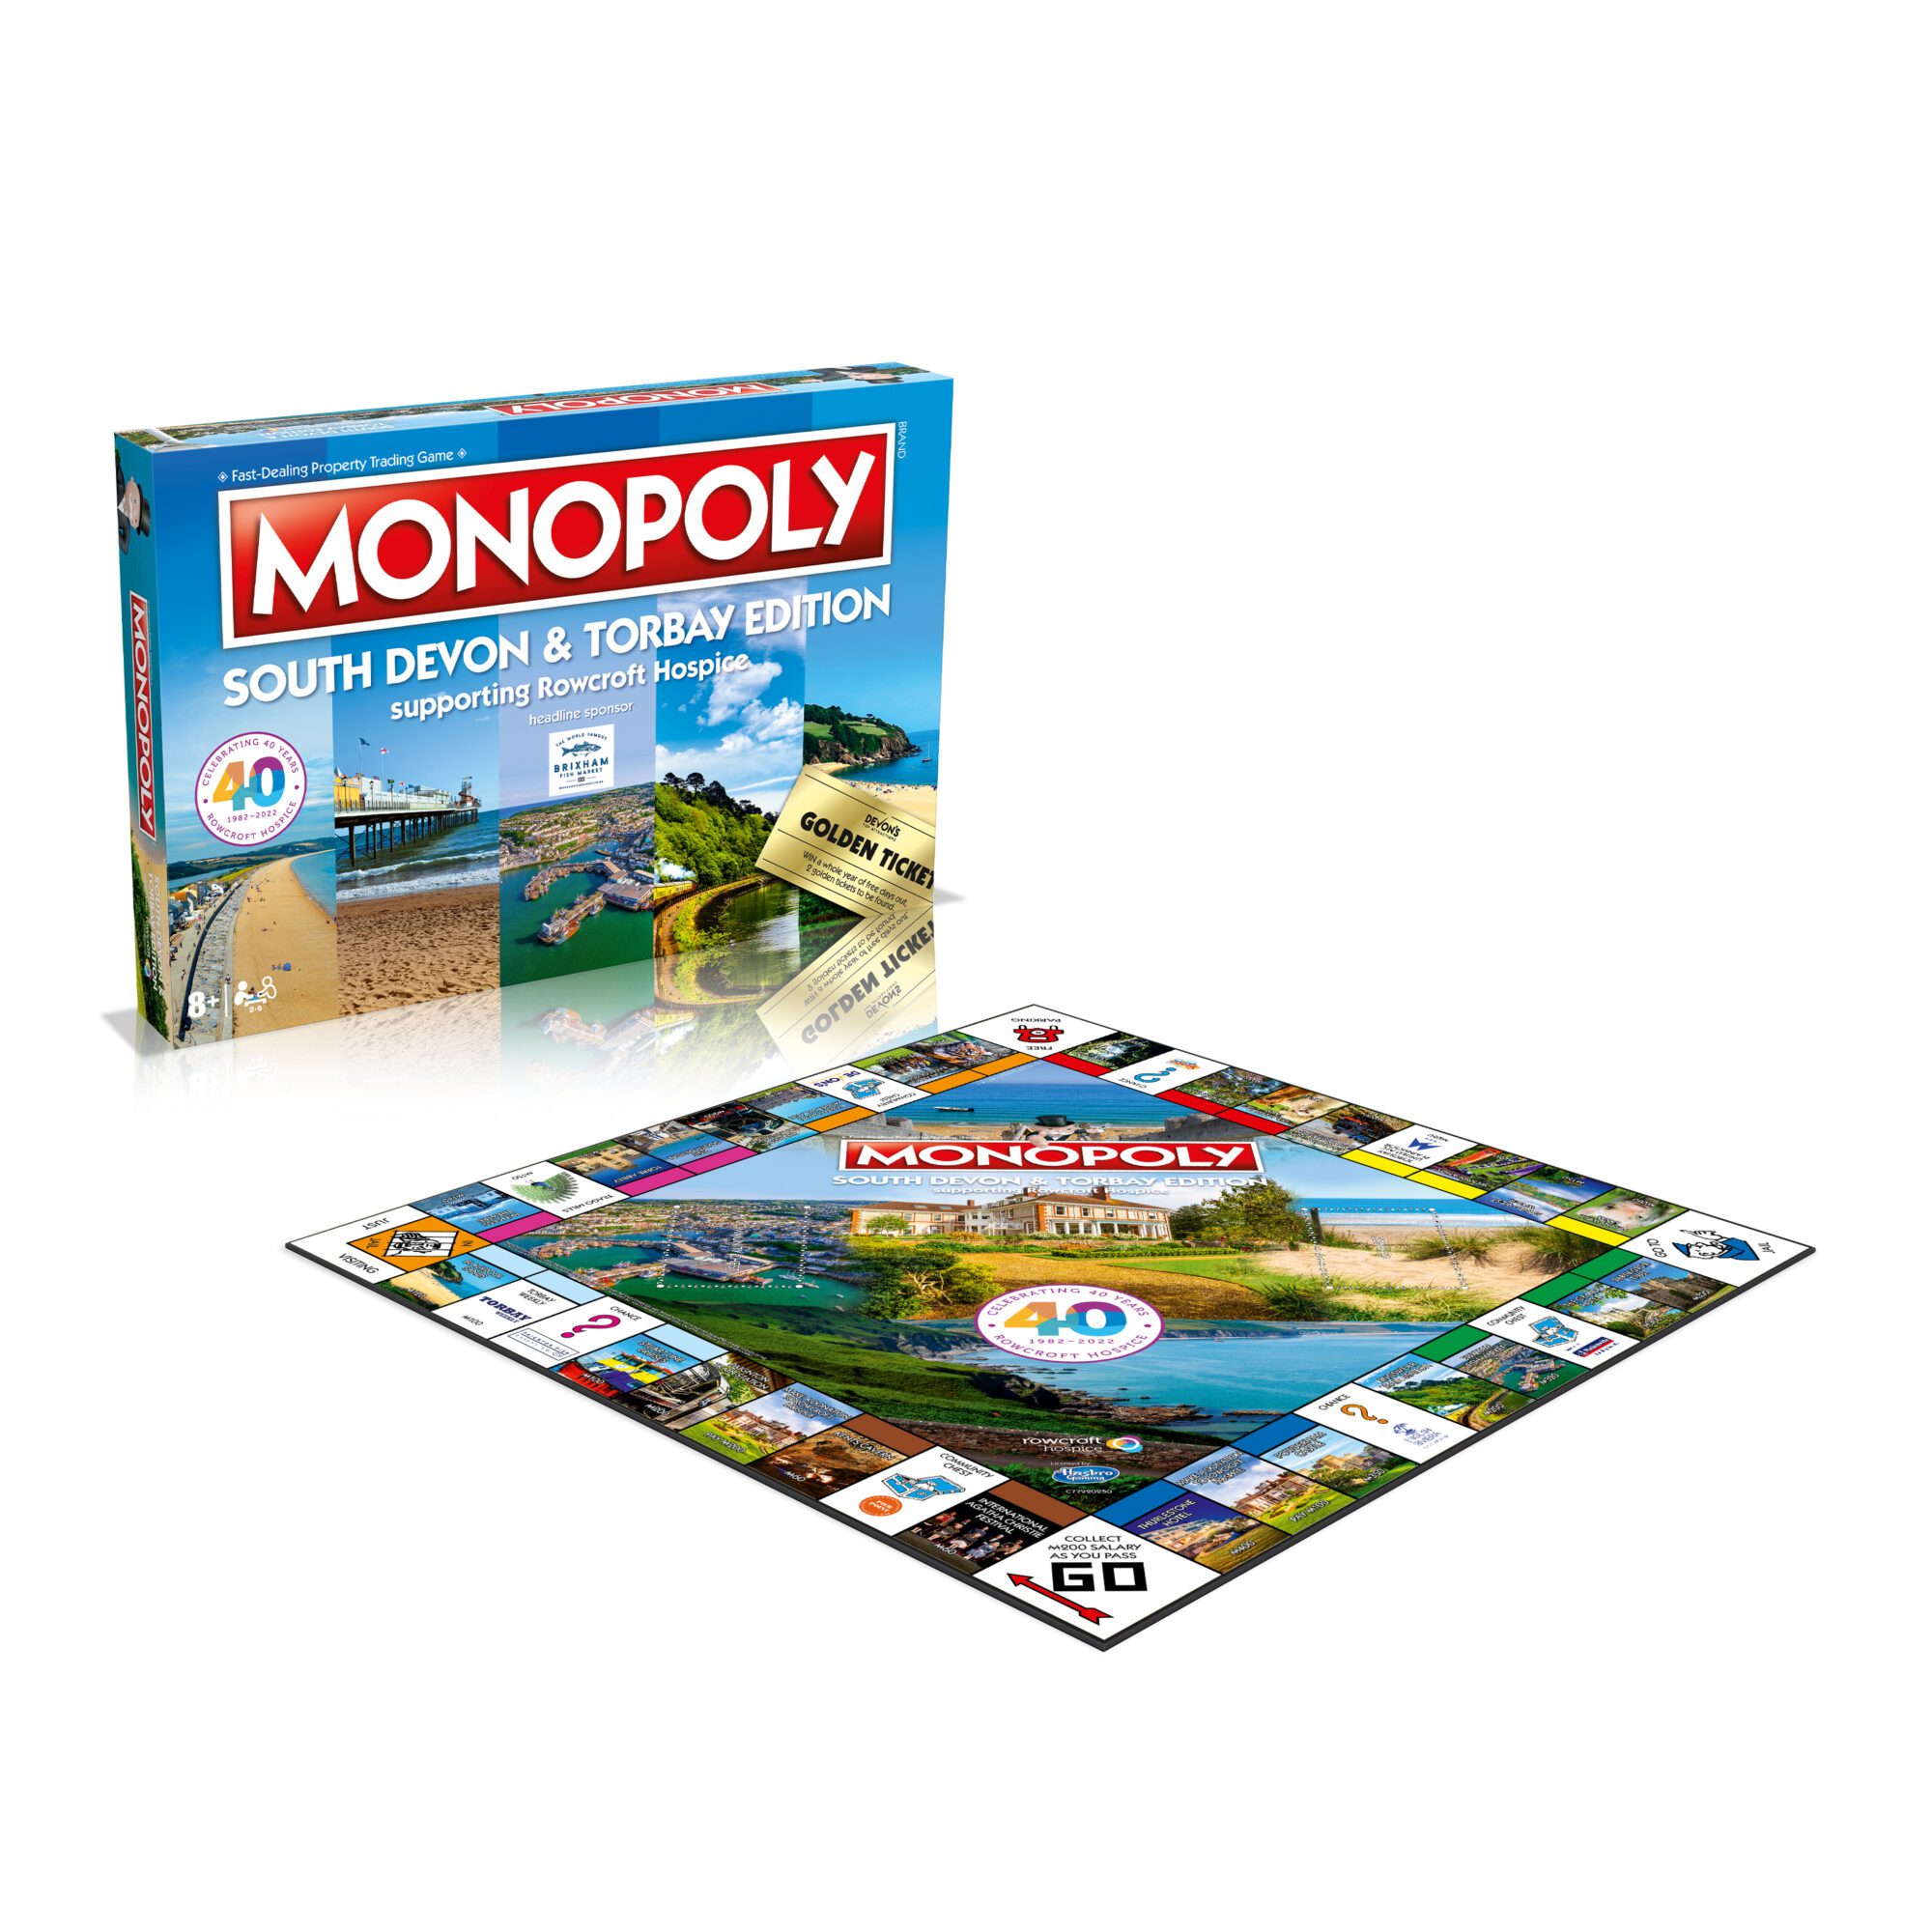 Monopoly box and board